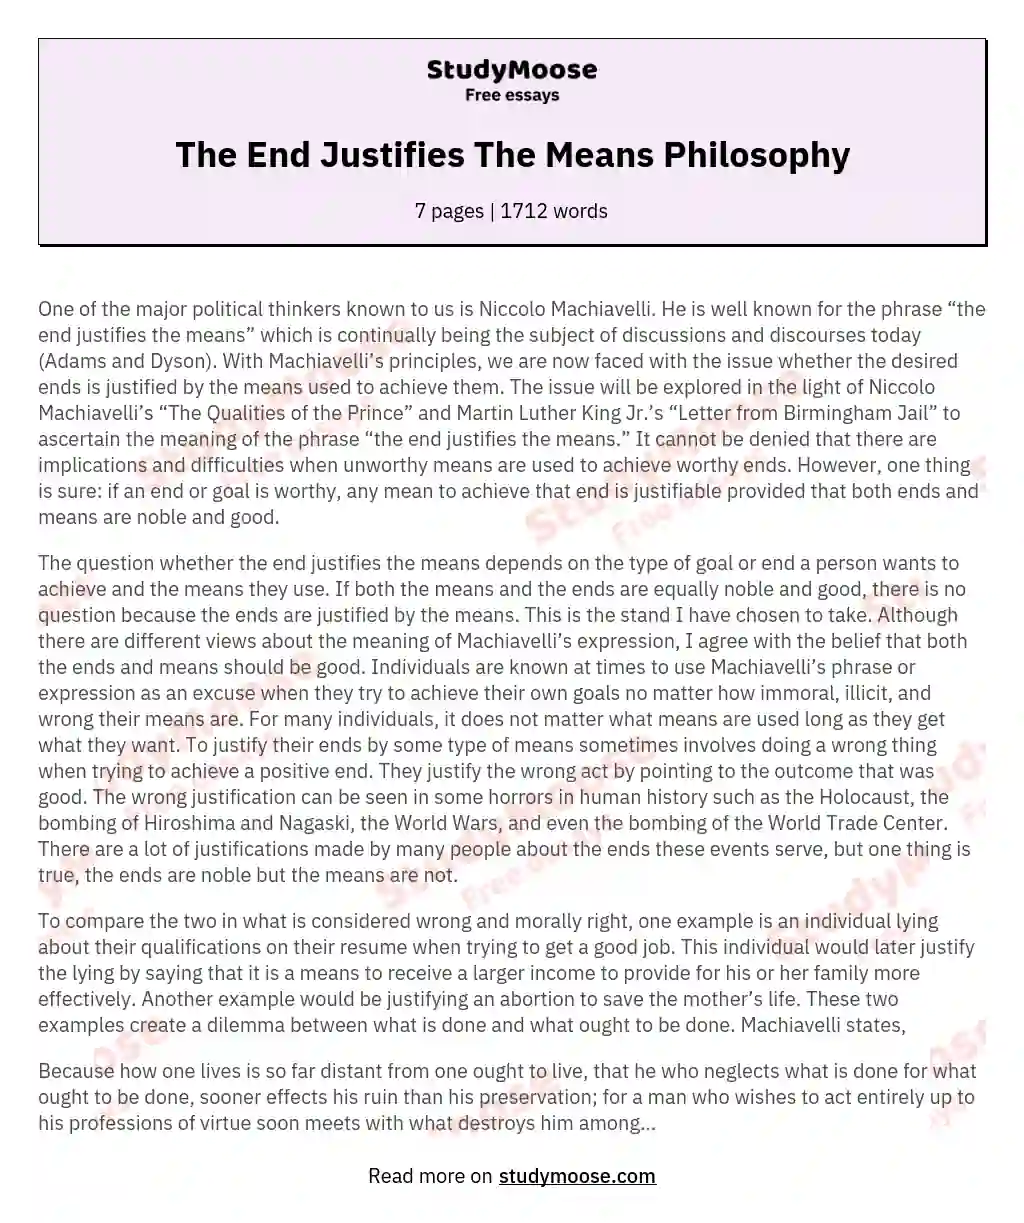 The End Justifies The Means Philosophy essay